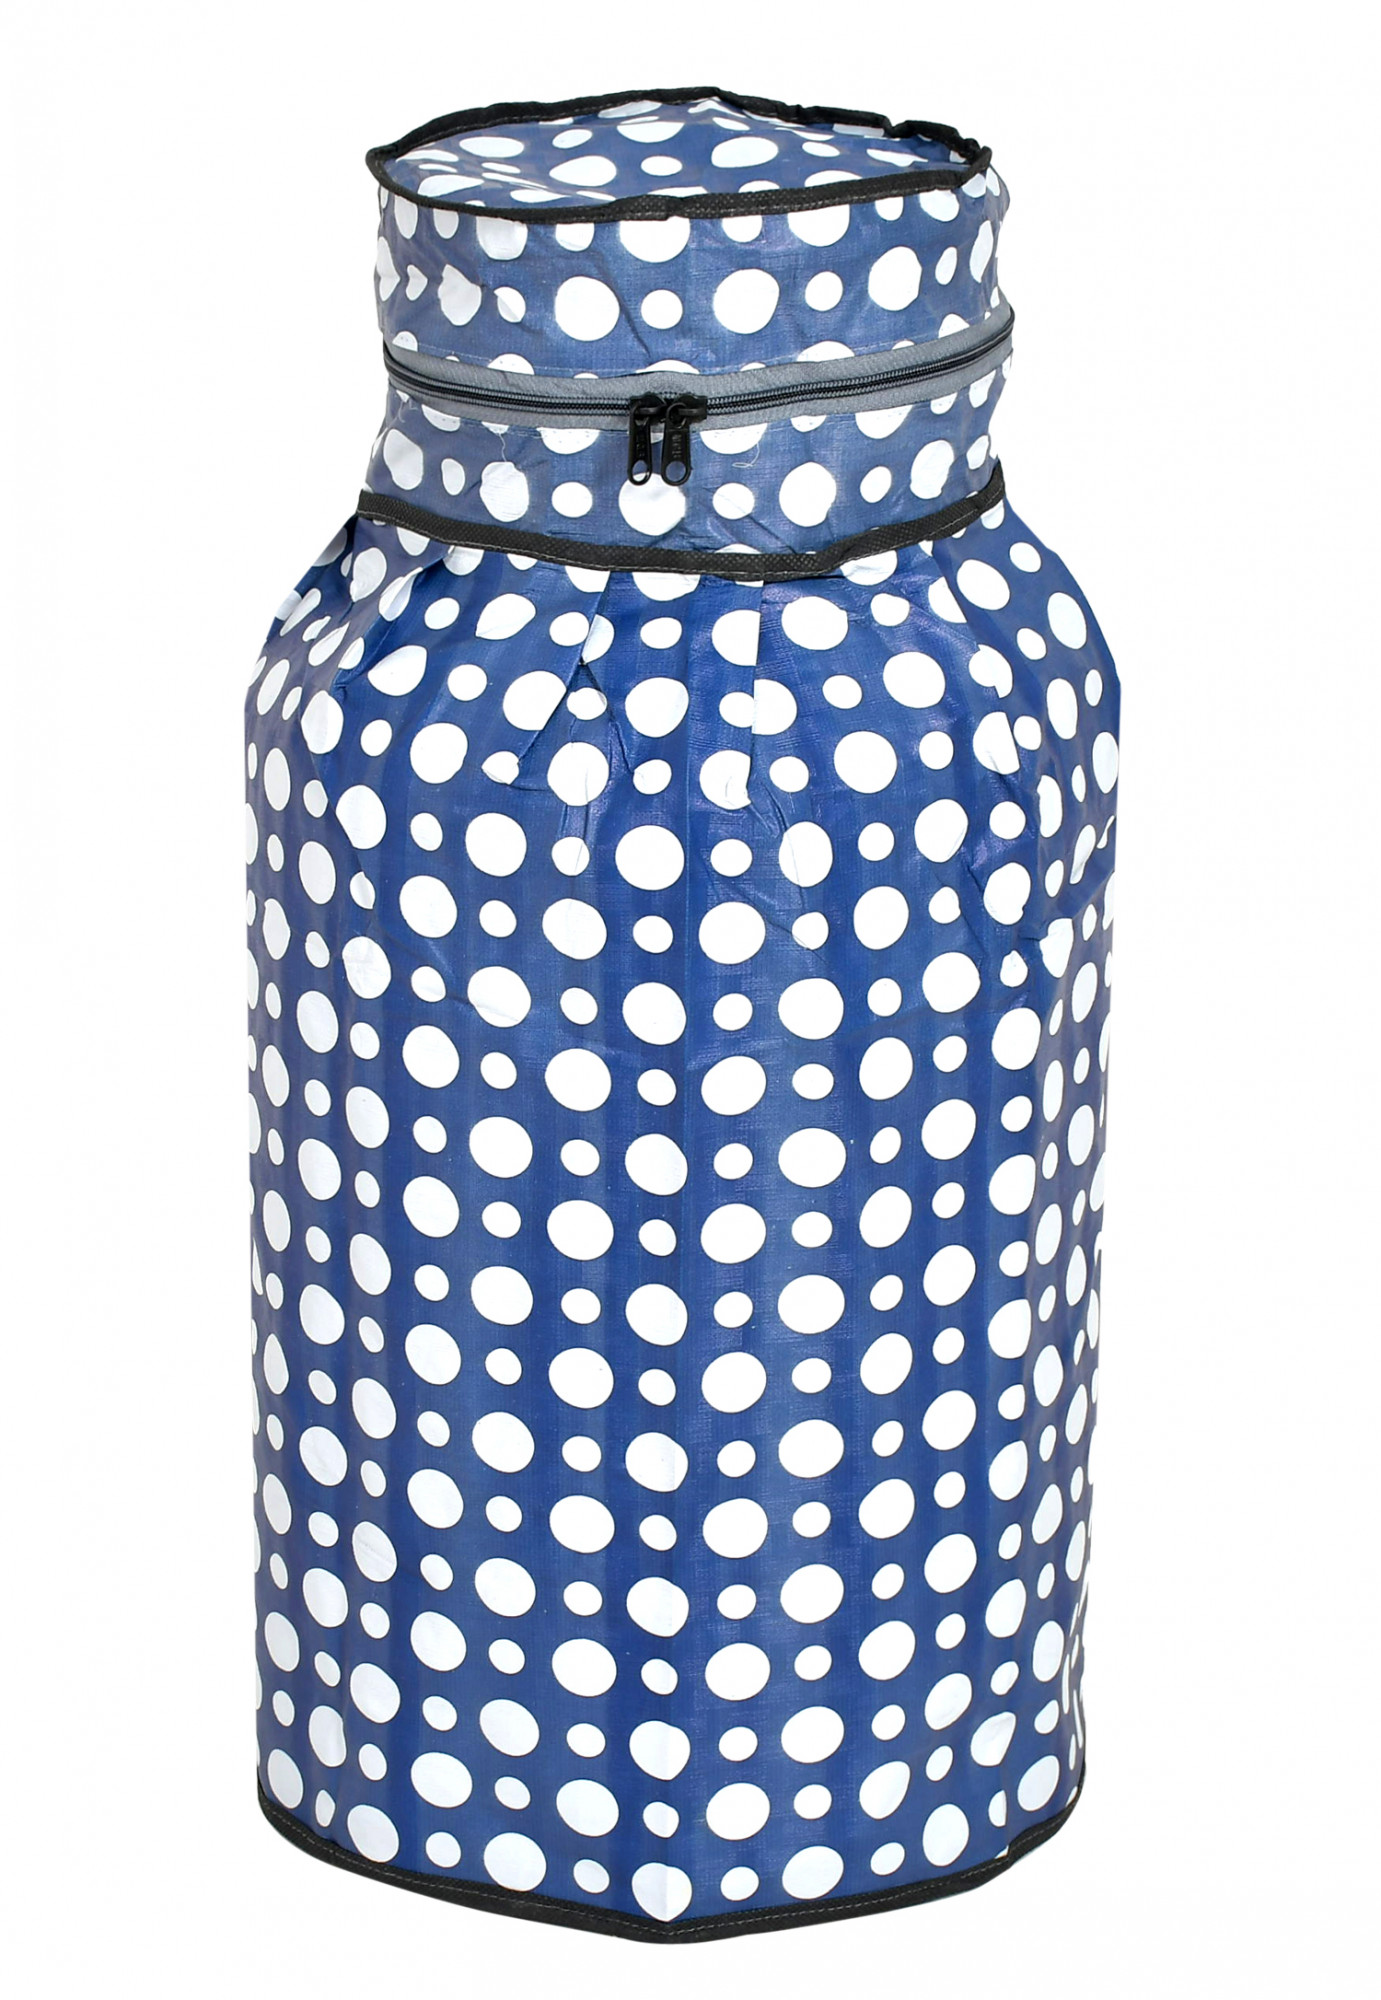 Kuber Industries Dot Printed PVC Lpg Gas Cylinder Cover- Pack of 2 (Blue & White)-HS43KUBMART25623, Standard